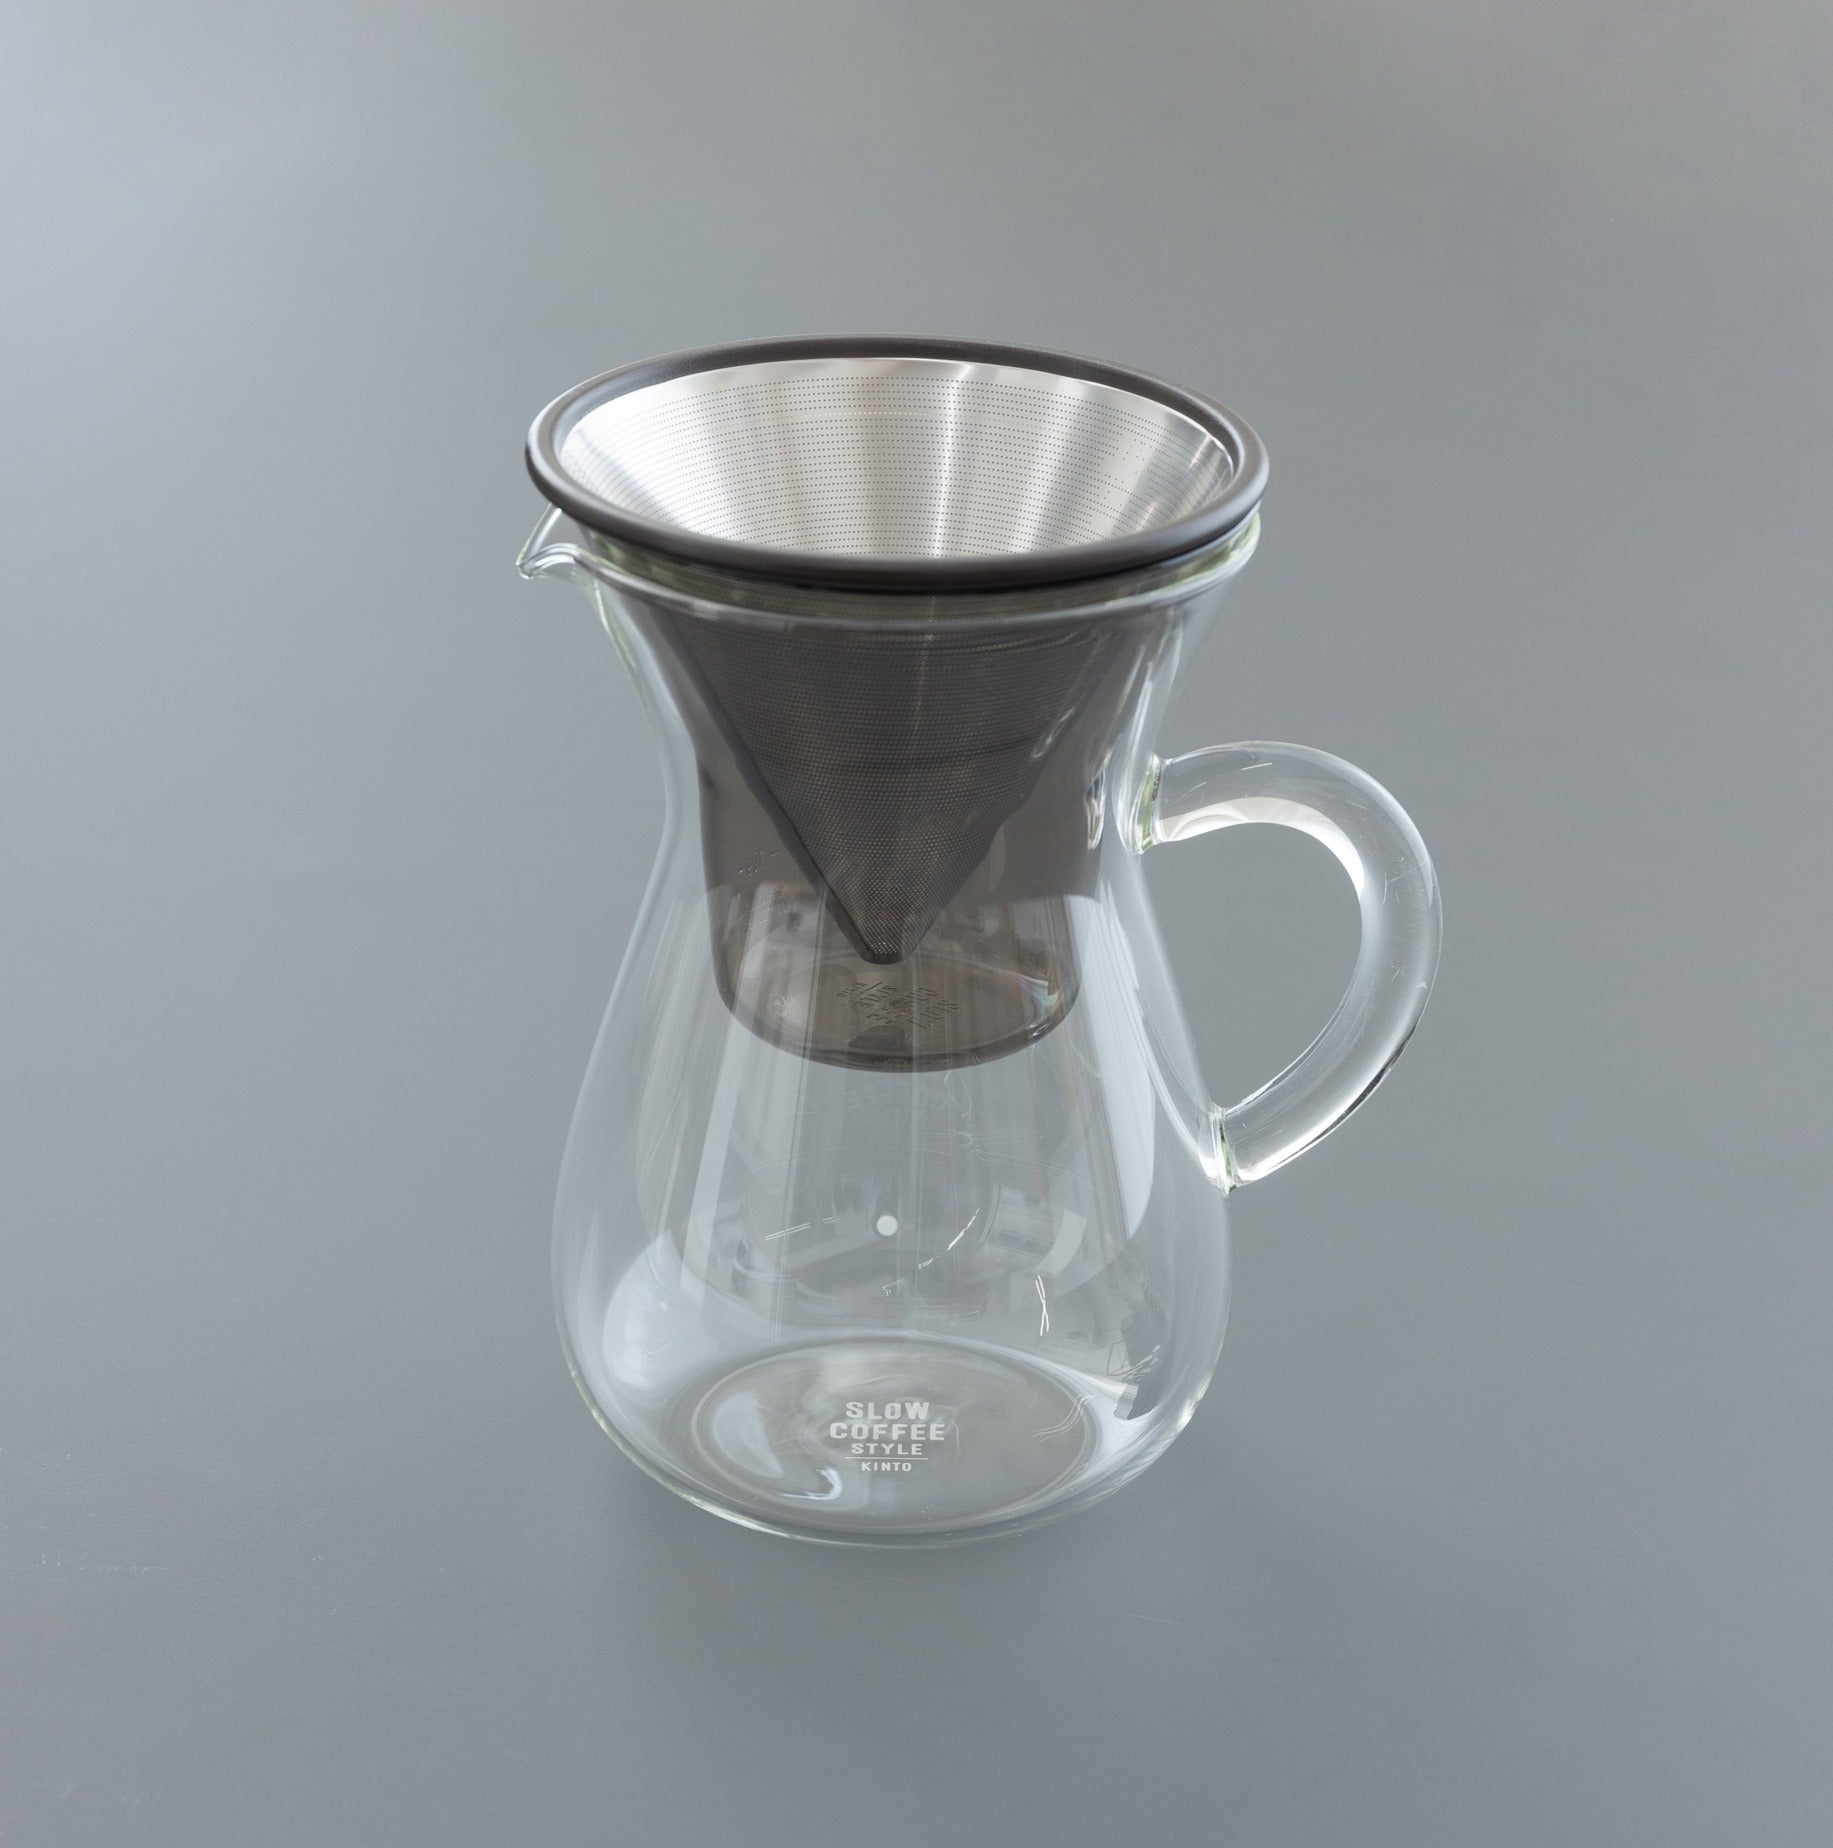 KINTO SCS Coffee Carafe Set 4 Cups | Tortoise General Store